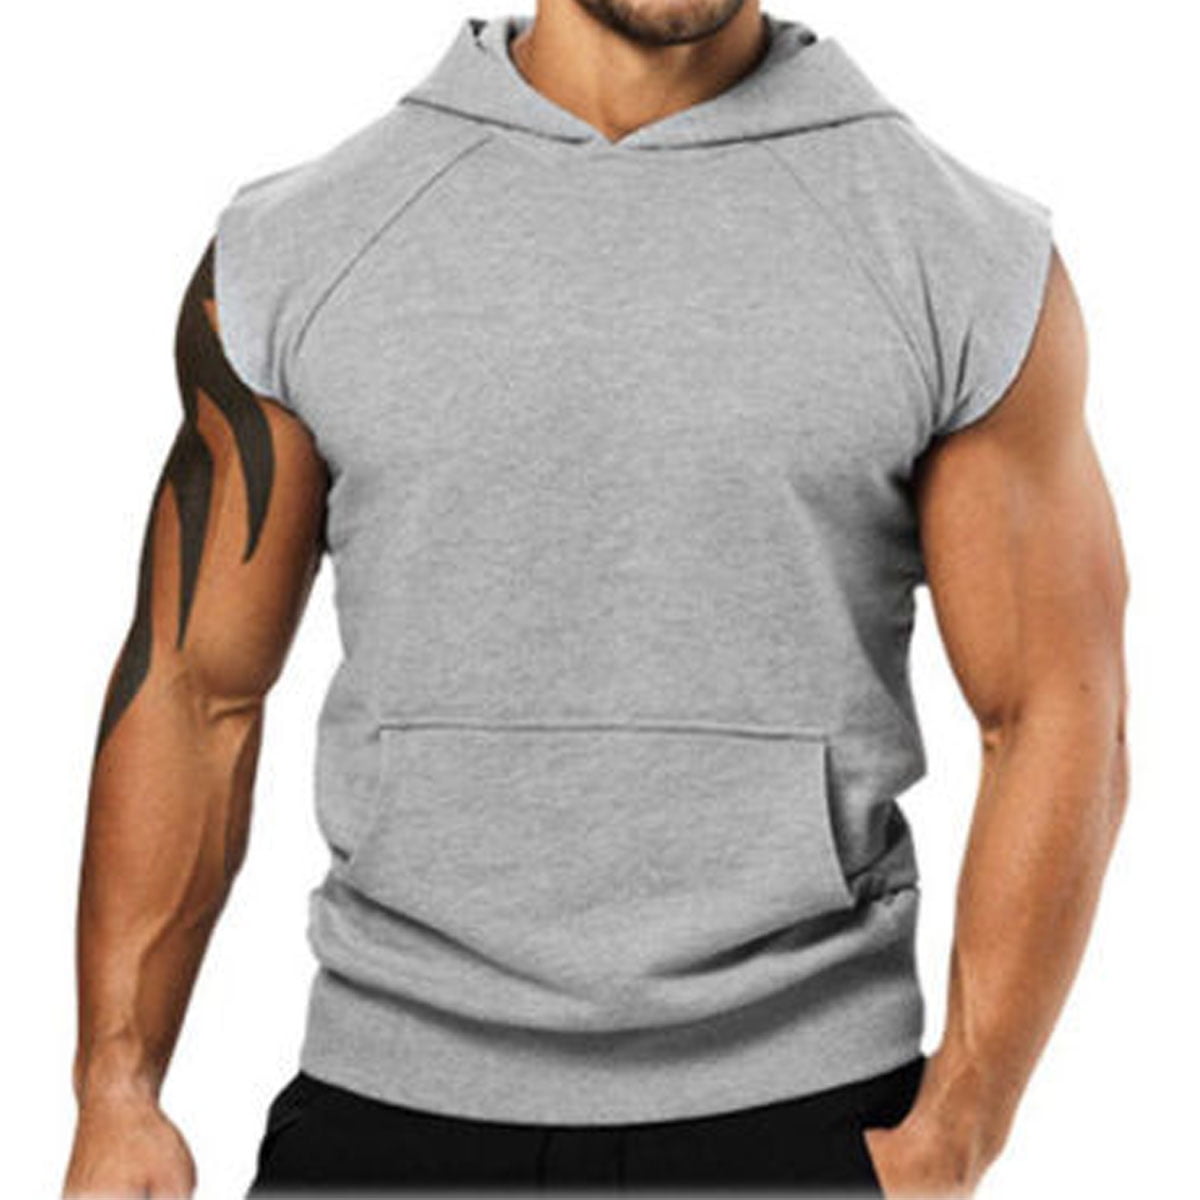 Opperiaya - Mens Muscle Hoodie Tank Top Gym Workout Sleeveless Vest T ...